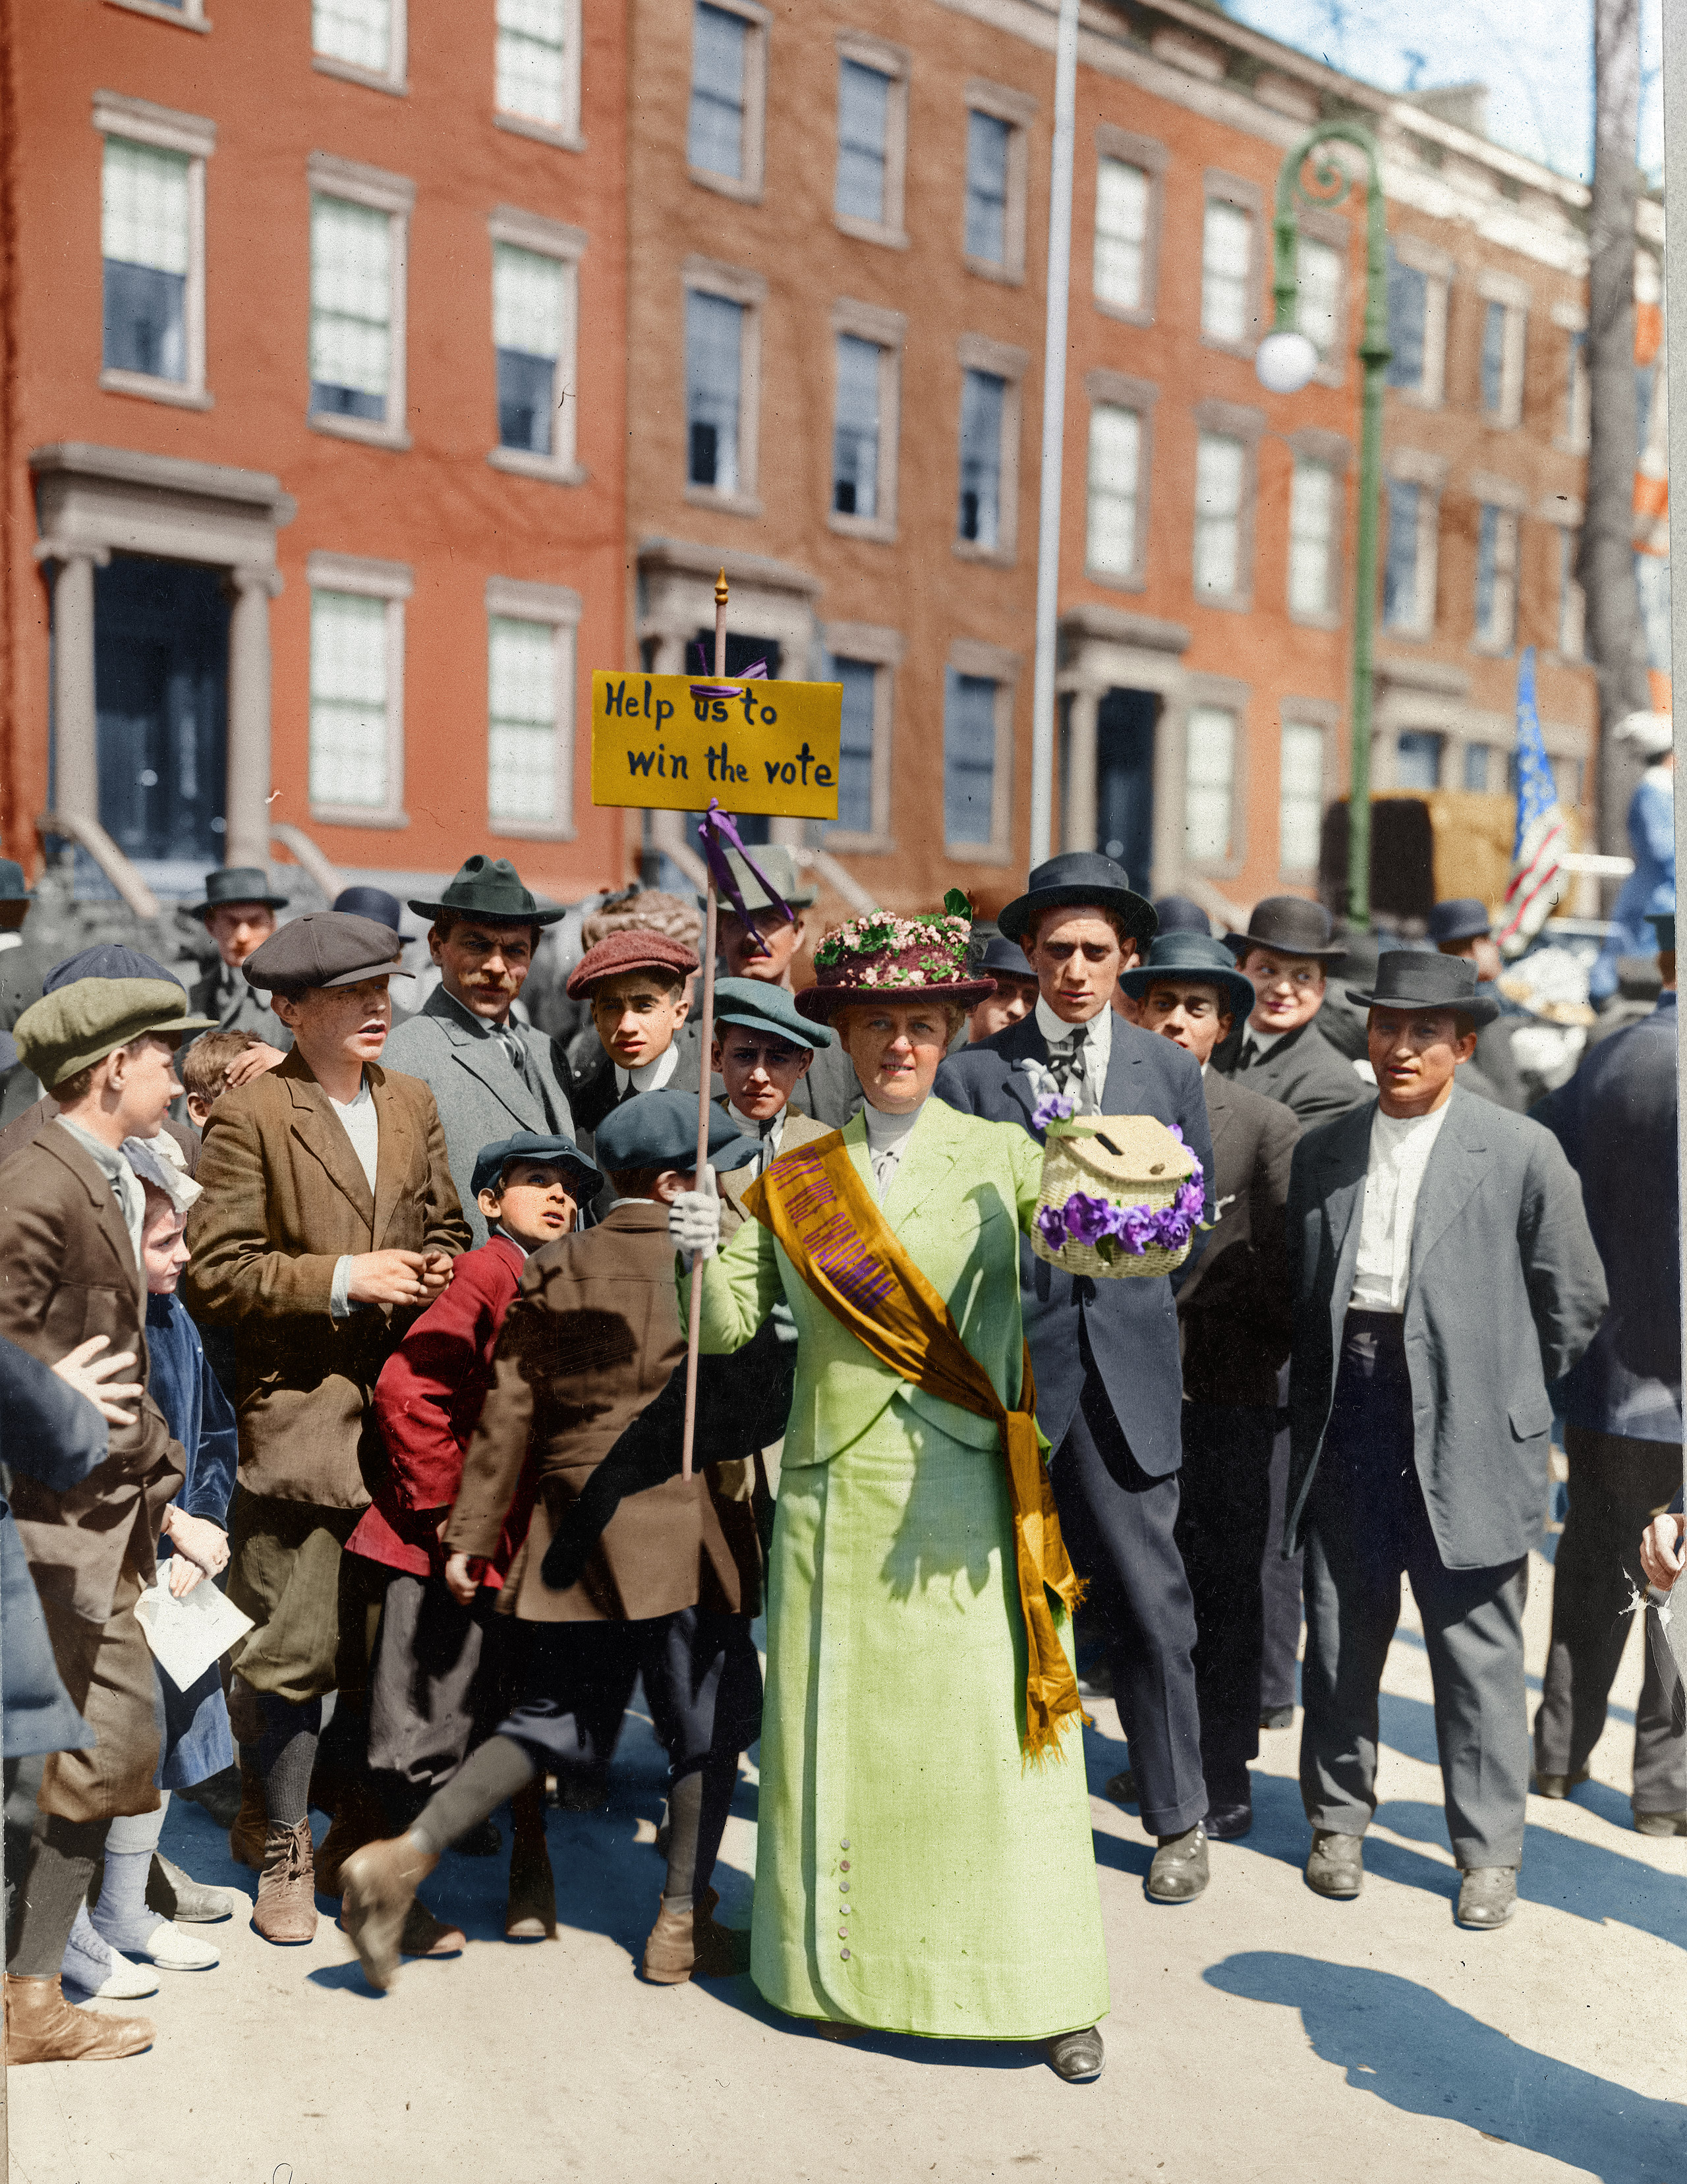 Mrs. Suffern wearing a sash and carrying a sign that says  Help us to win the vote,  surrounded by a crowd of men and boys at a Women's Suffrage Parade in 1914.